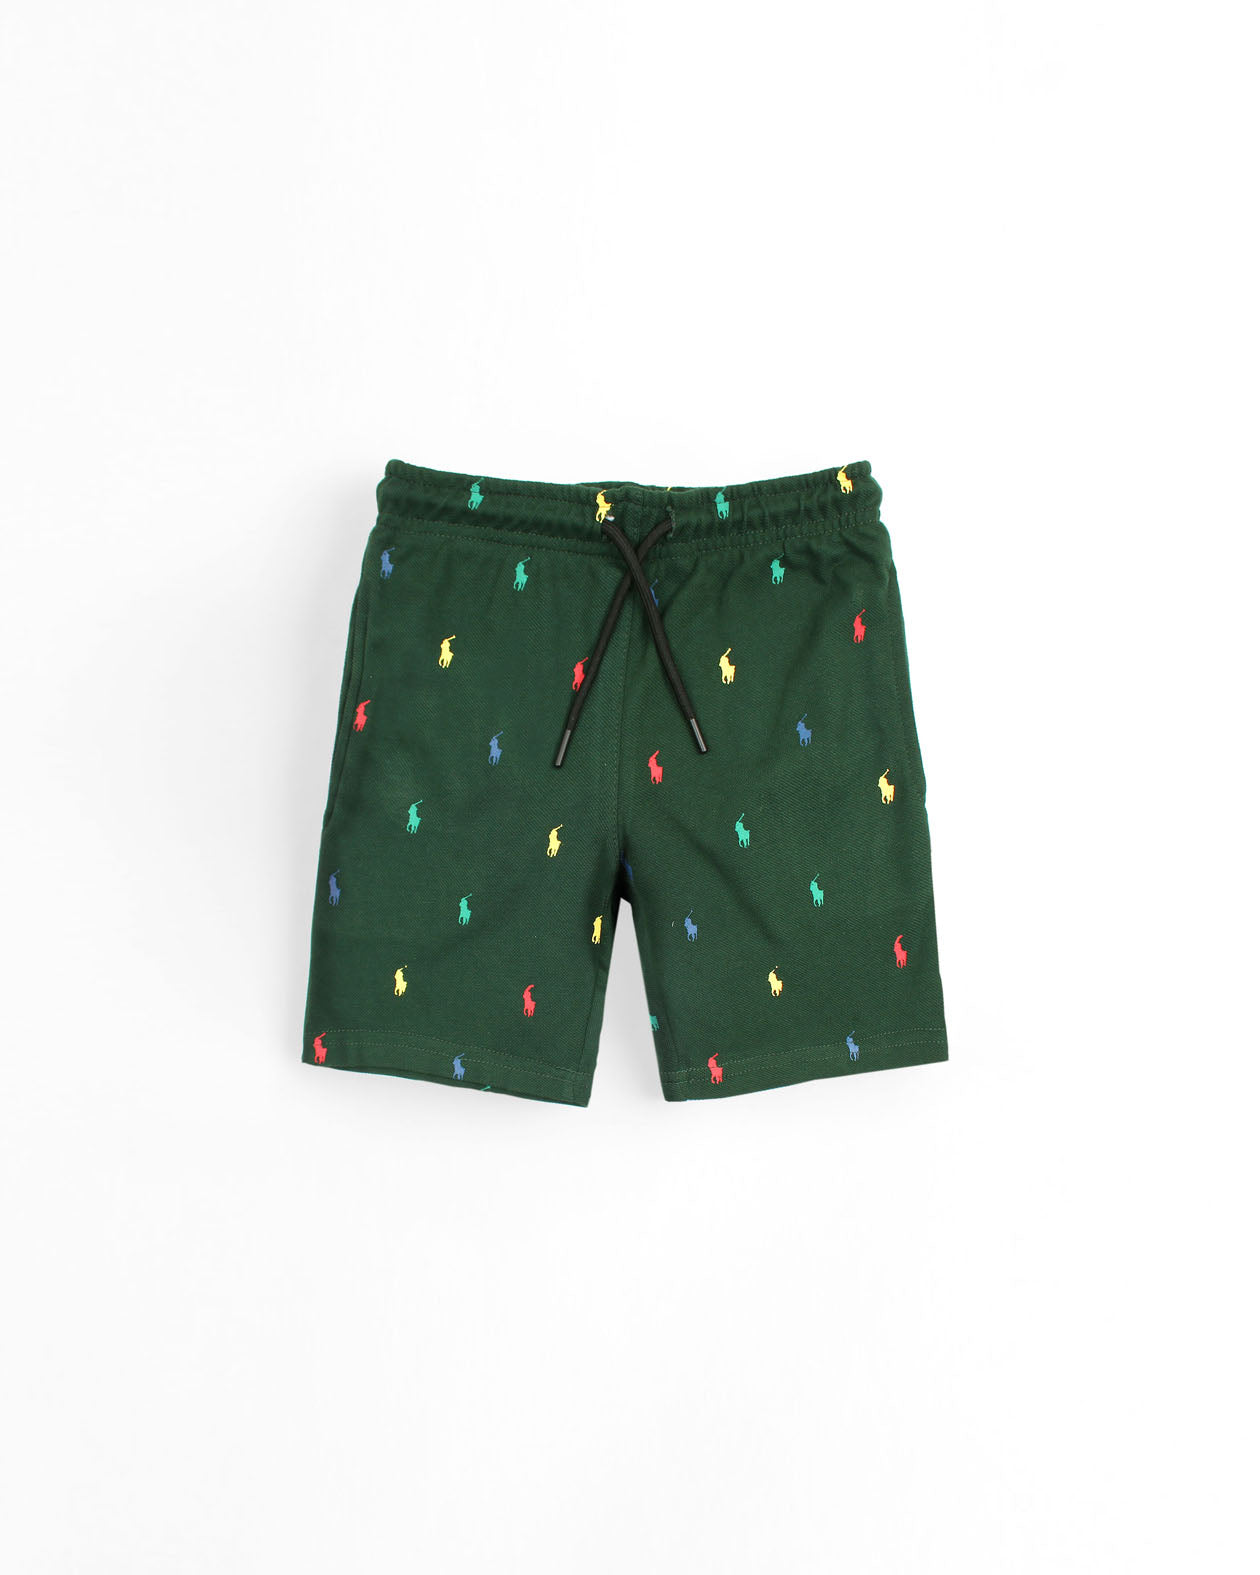 Exclusive All Over Pony Boys Short - Green